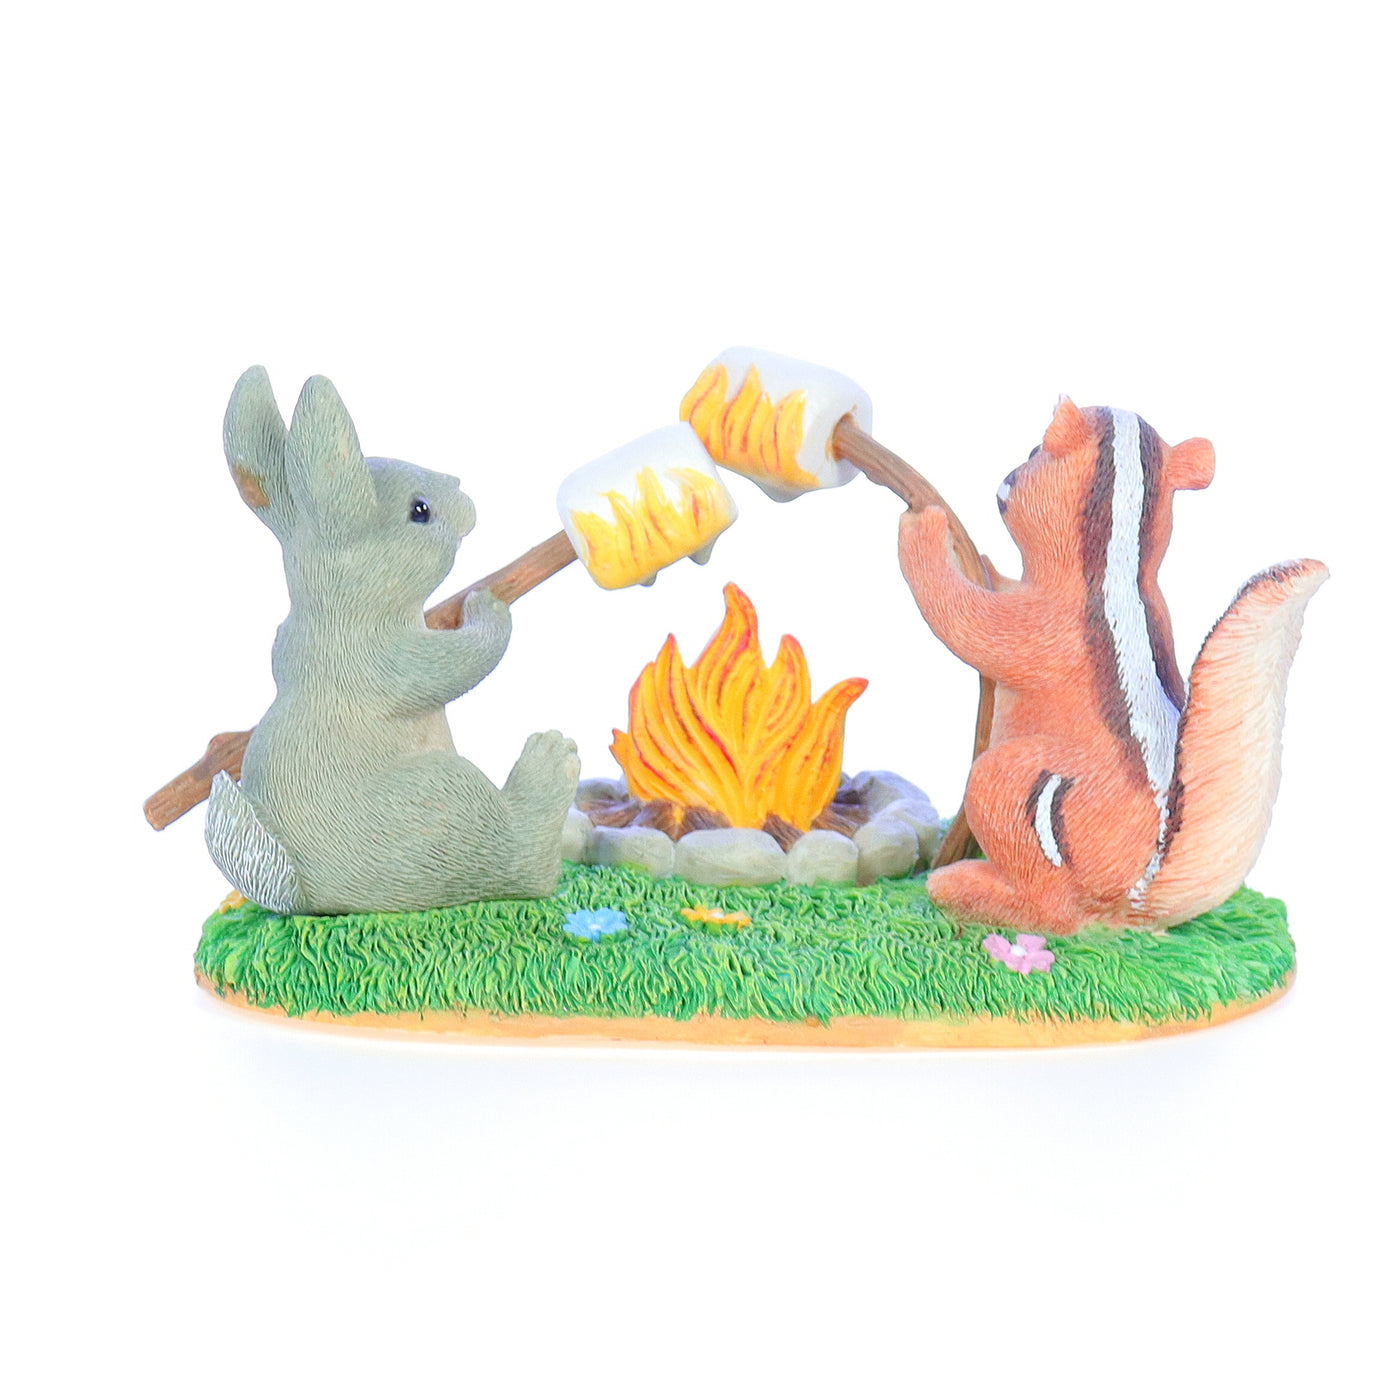 charming tails 83700 toasting marshmallows friendship figurine Back